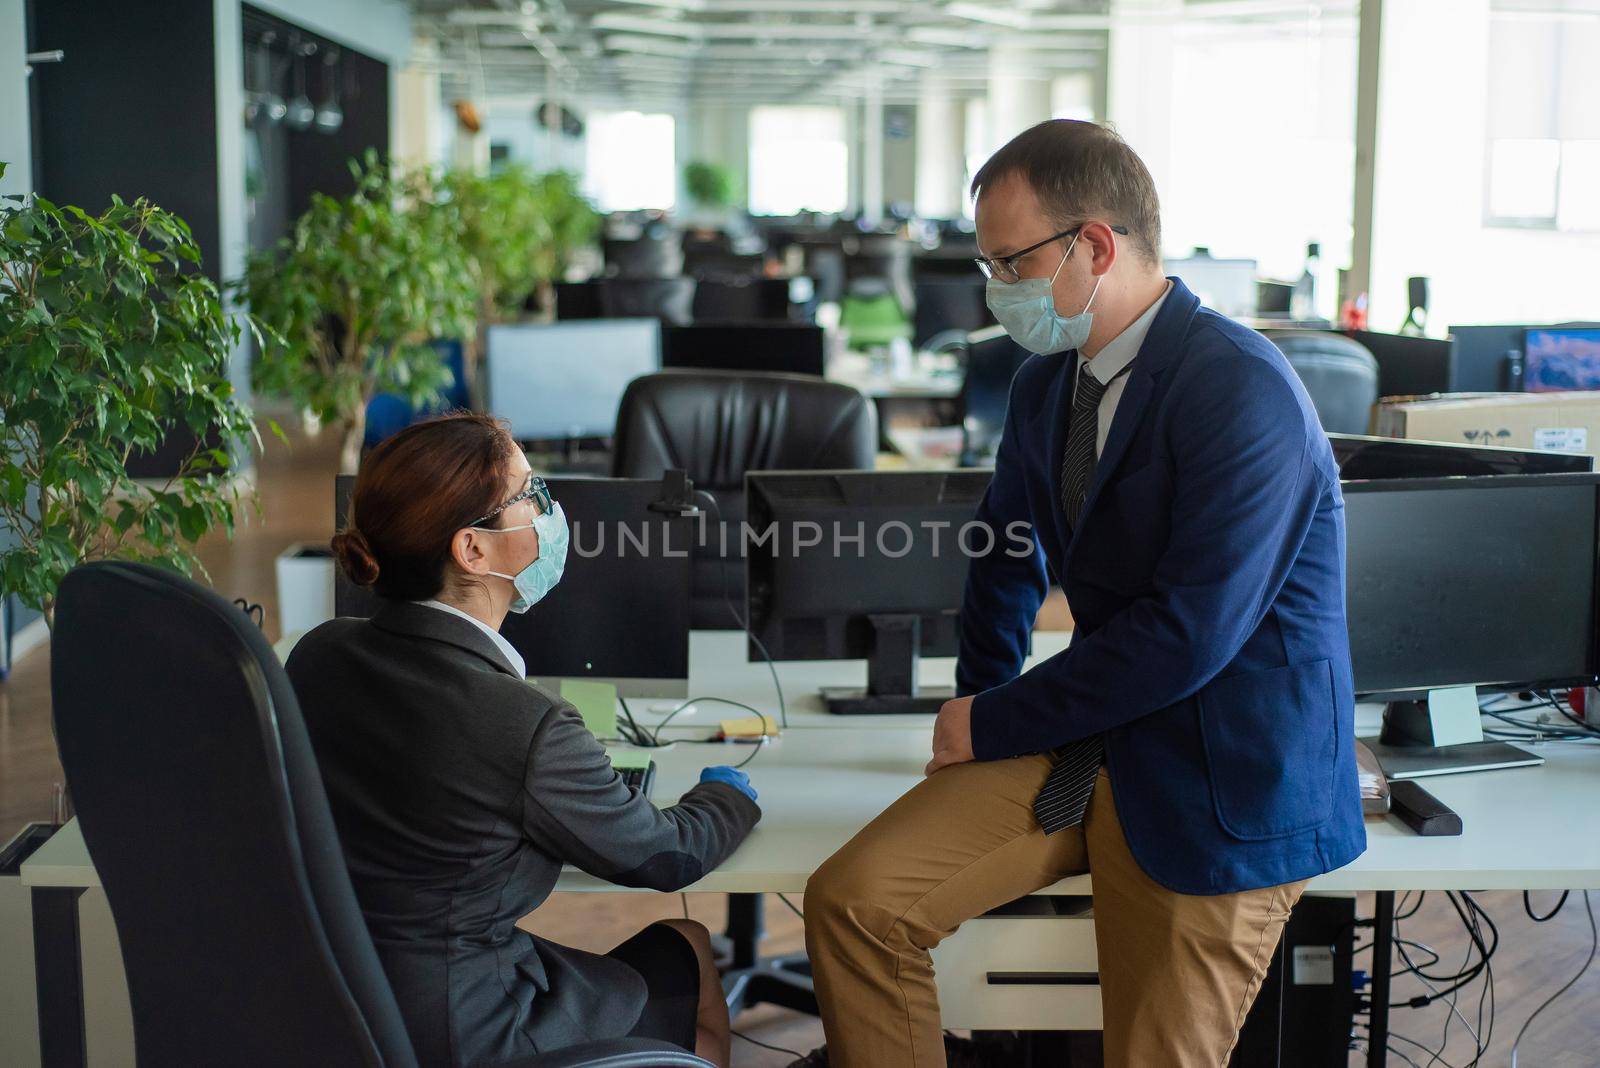 Colleagues work in medical masks in an open office space communicate at the desk. A man and a woman in office suits are discussing a working draft. The boss controls the subordinate